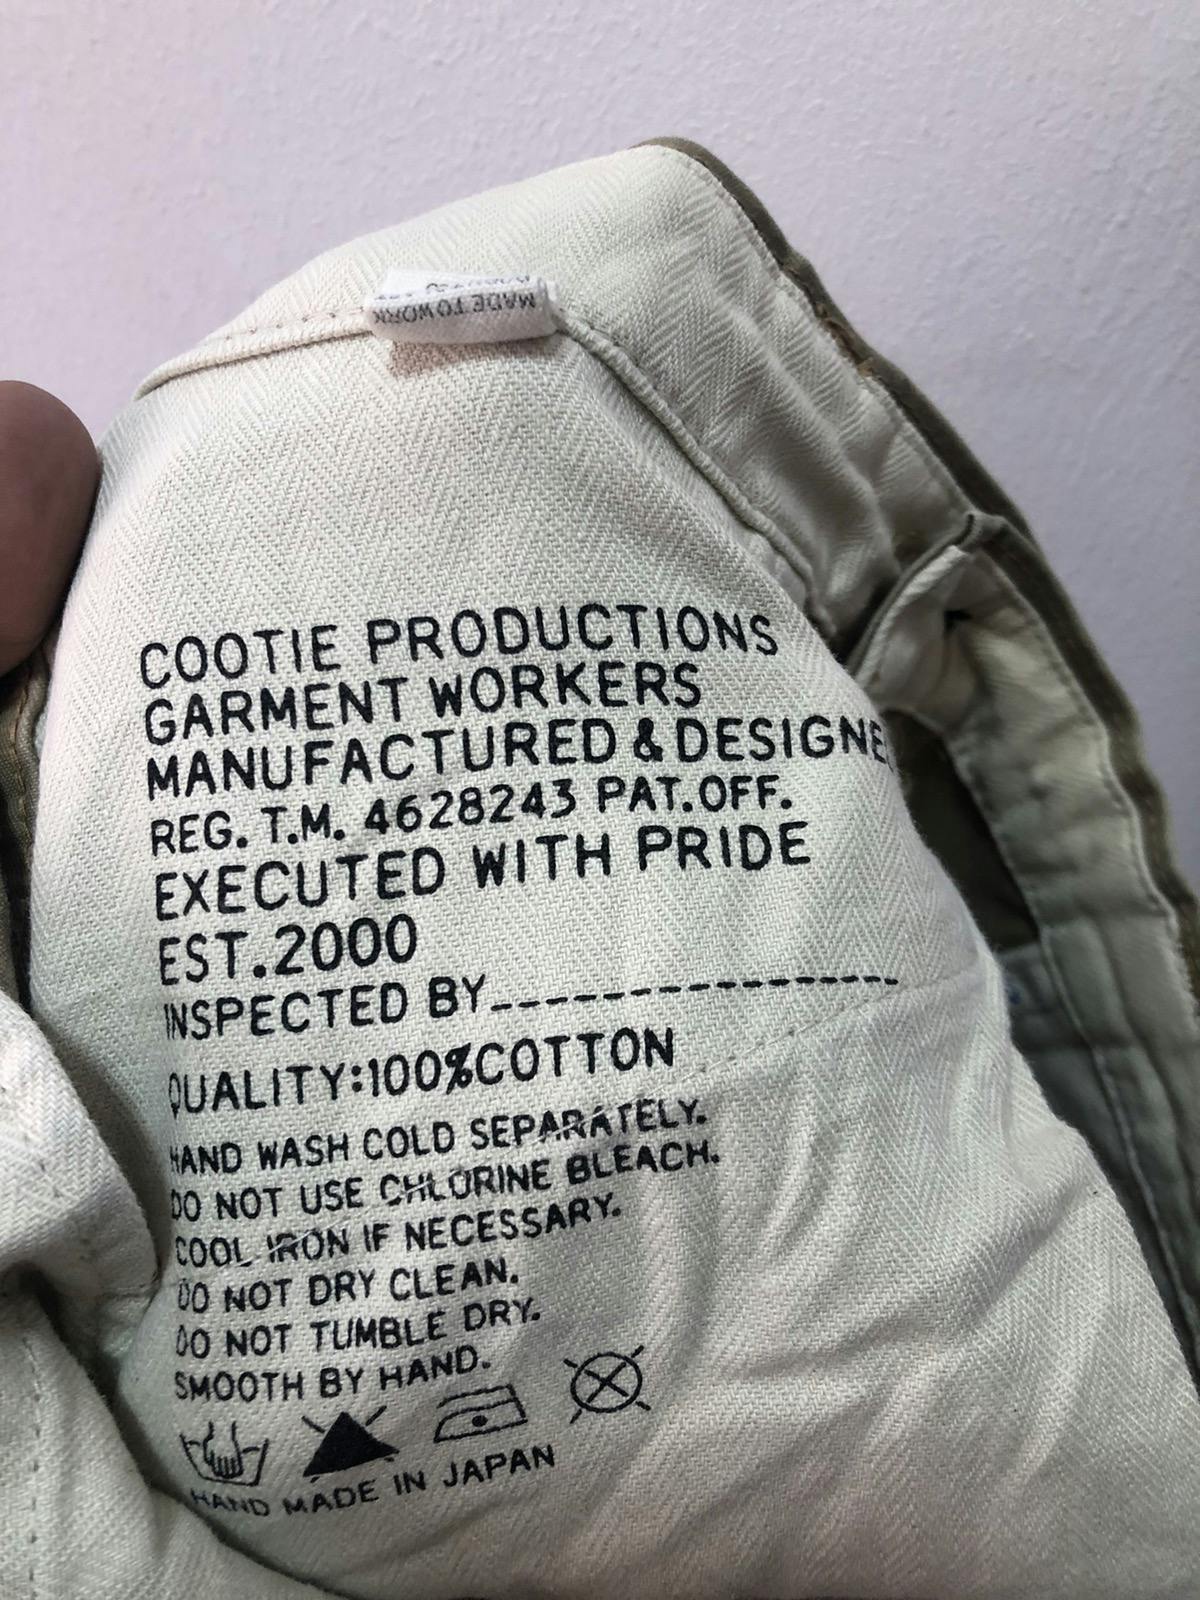 COOTIE PRODUCTIONS Pants Garment Workers Hand Made Japan - 9